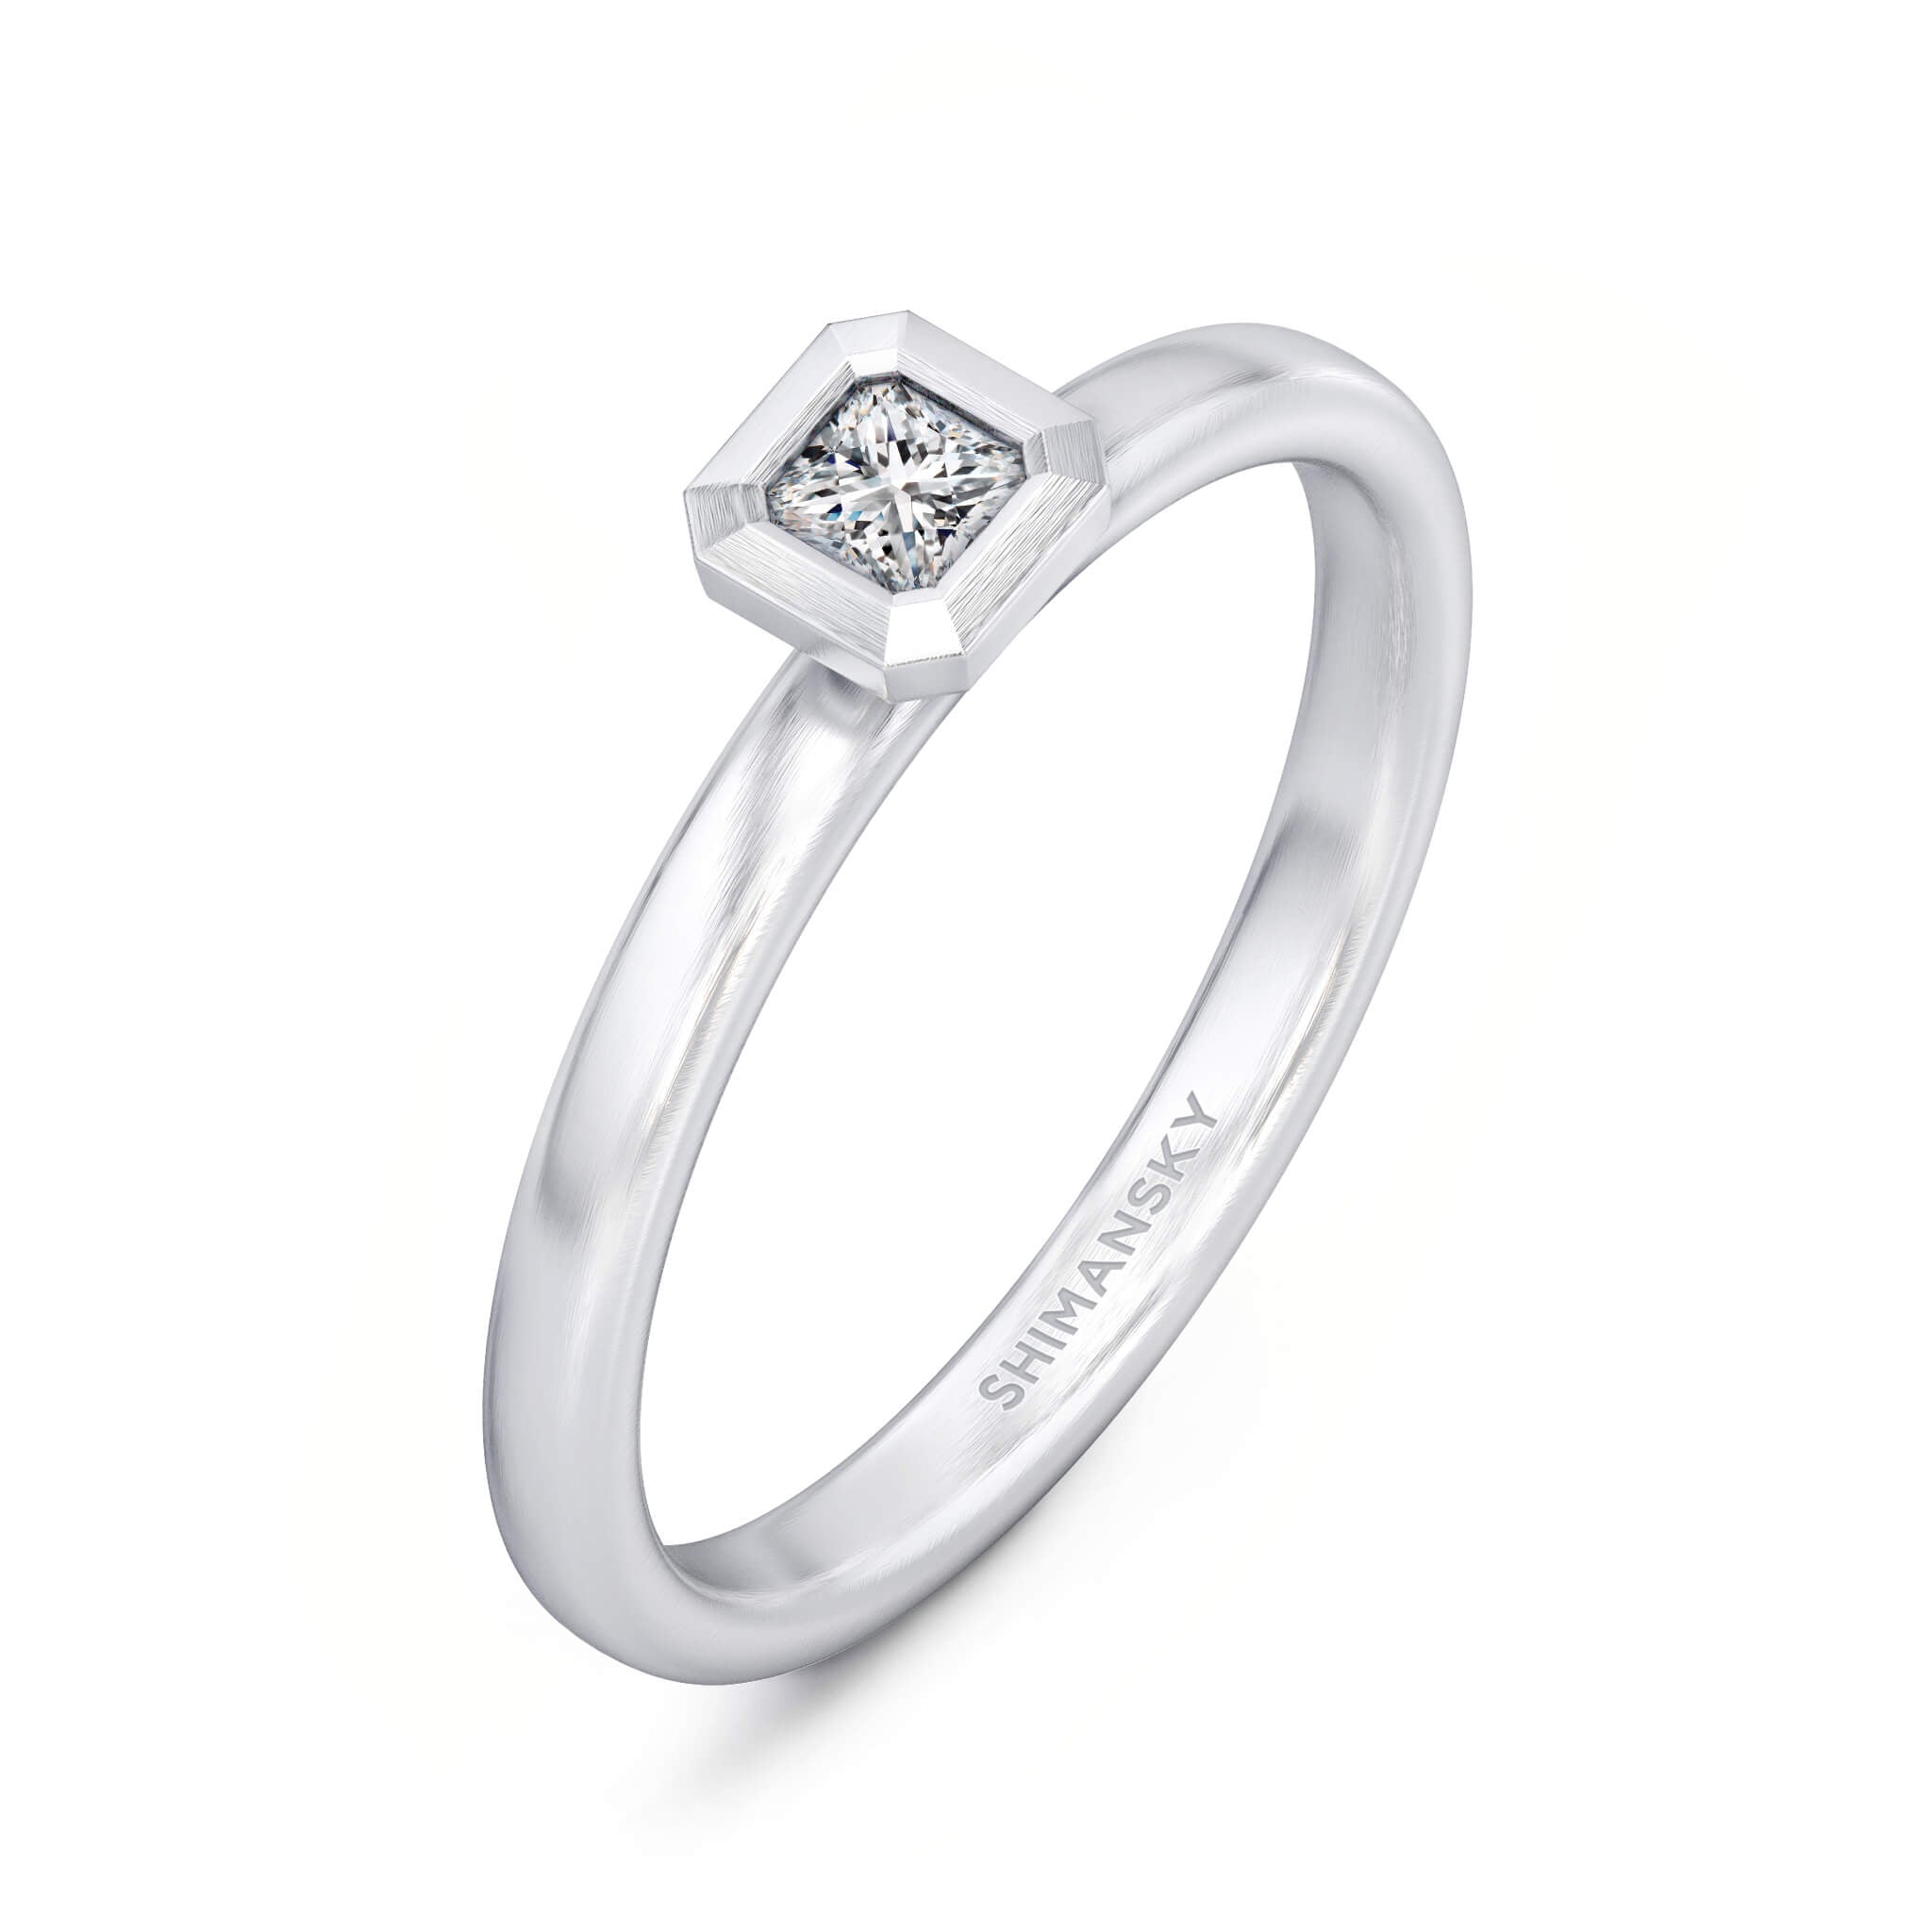 Shimansky - My Girl Diamond Tube Set Solitaire Ring 0.15ct Crafted in Brushed 18K White Gold